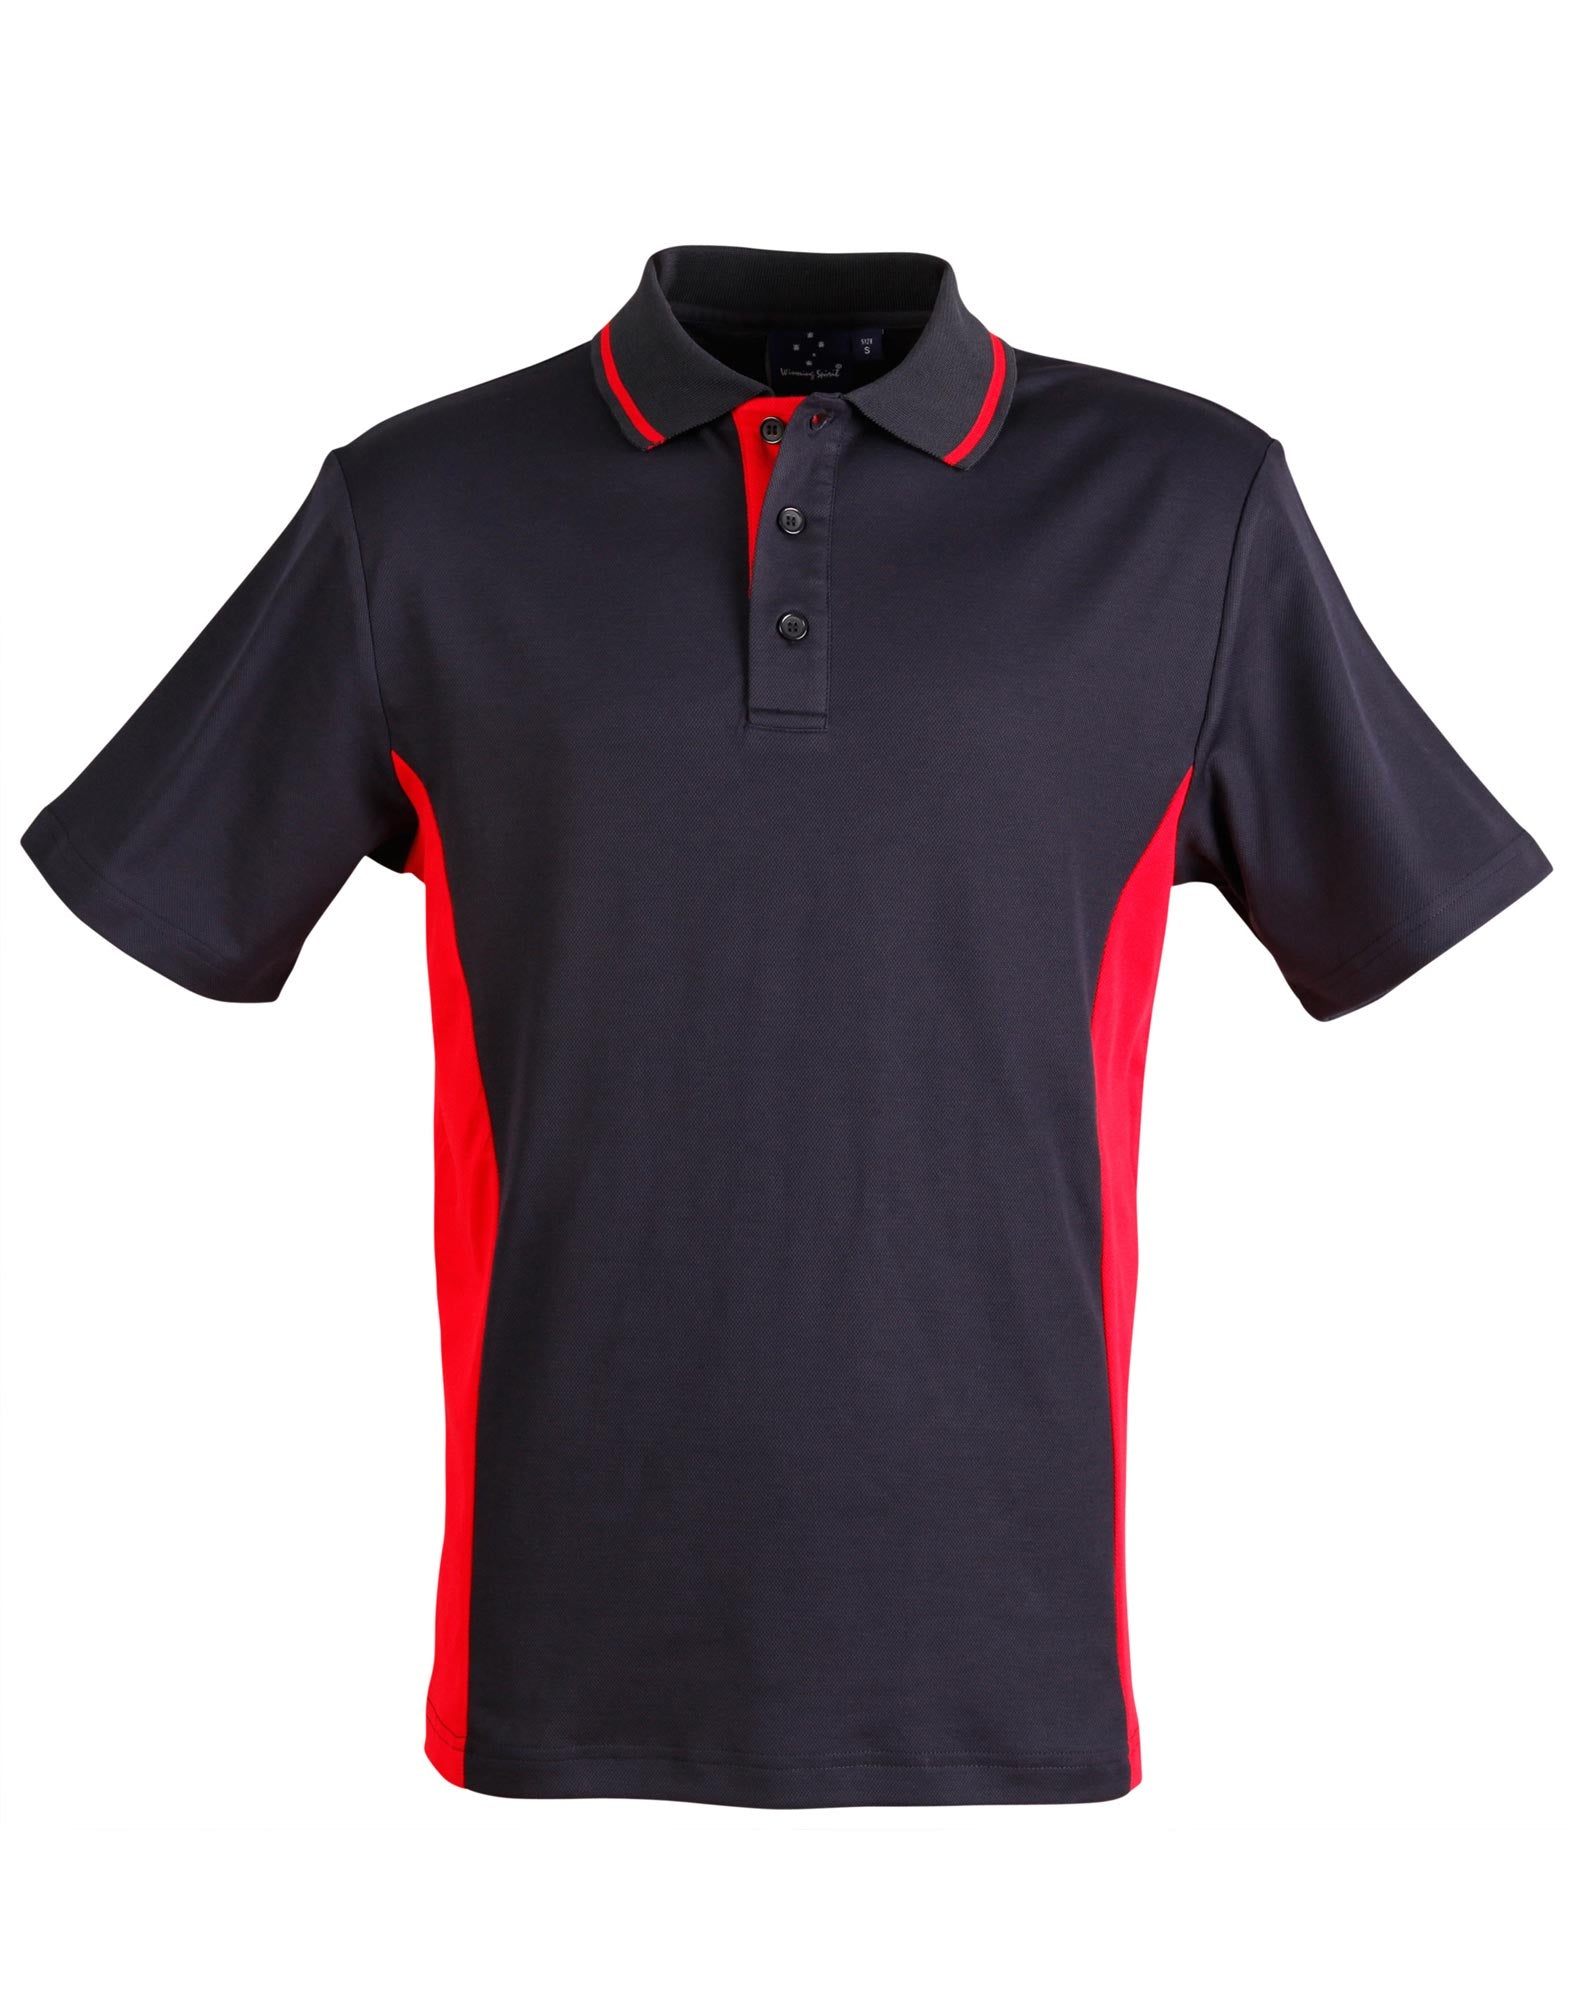 Mens Teammate Short Sleeve Polo - made by AIW